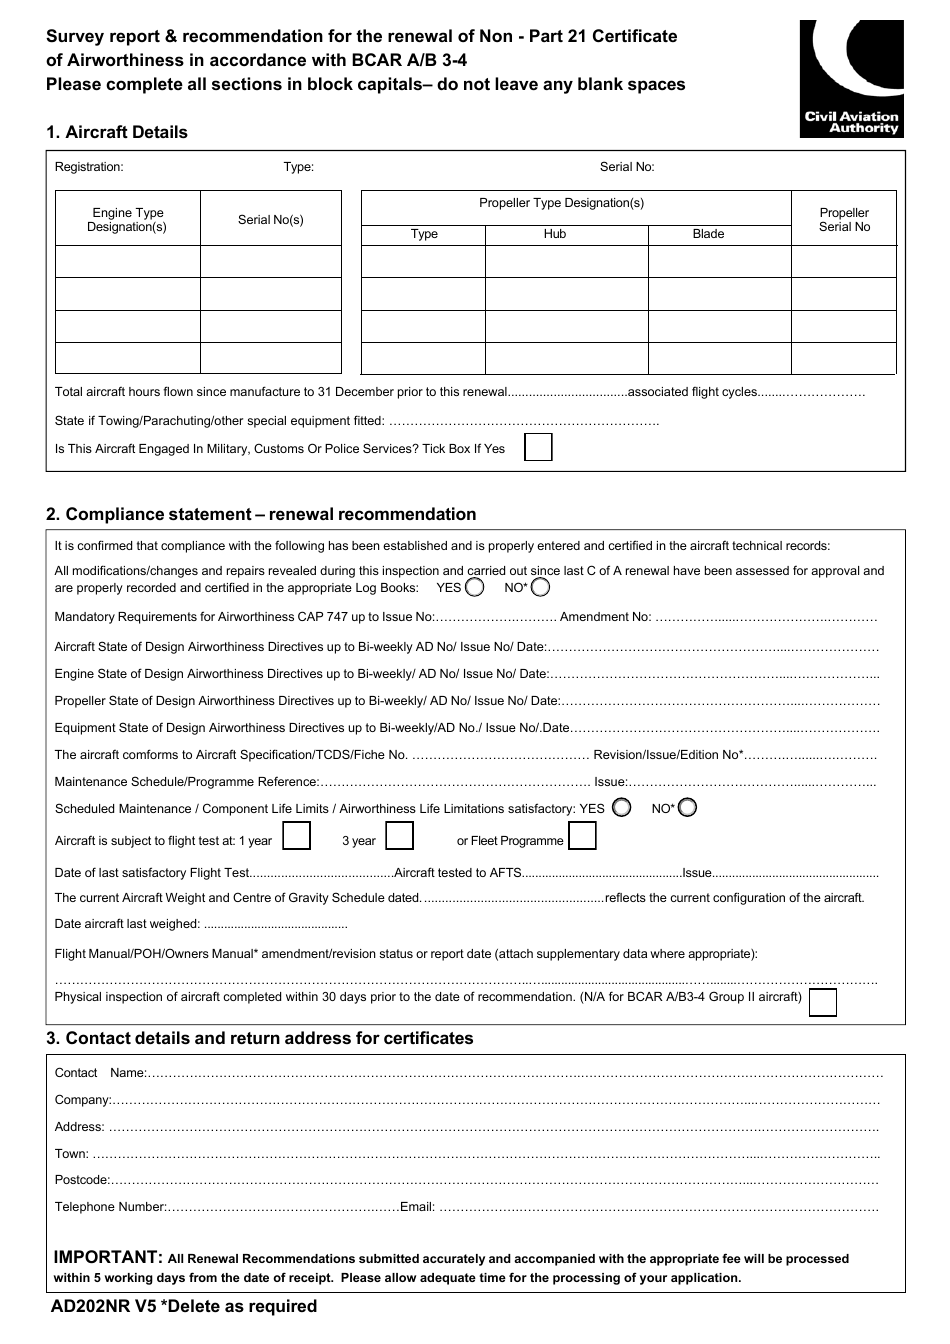 Form AD202NR Survey Report  Recommendation for the Renewal of Non - Part 21 Certificate of Airworthiness in Accordance With Bcar a / B 3-4 - United Kingdom, Page 1